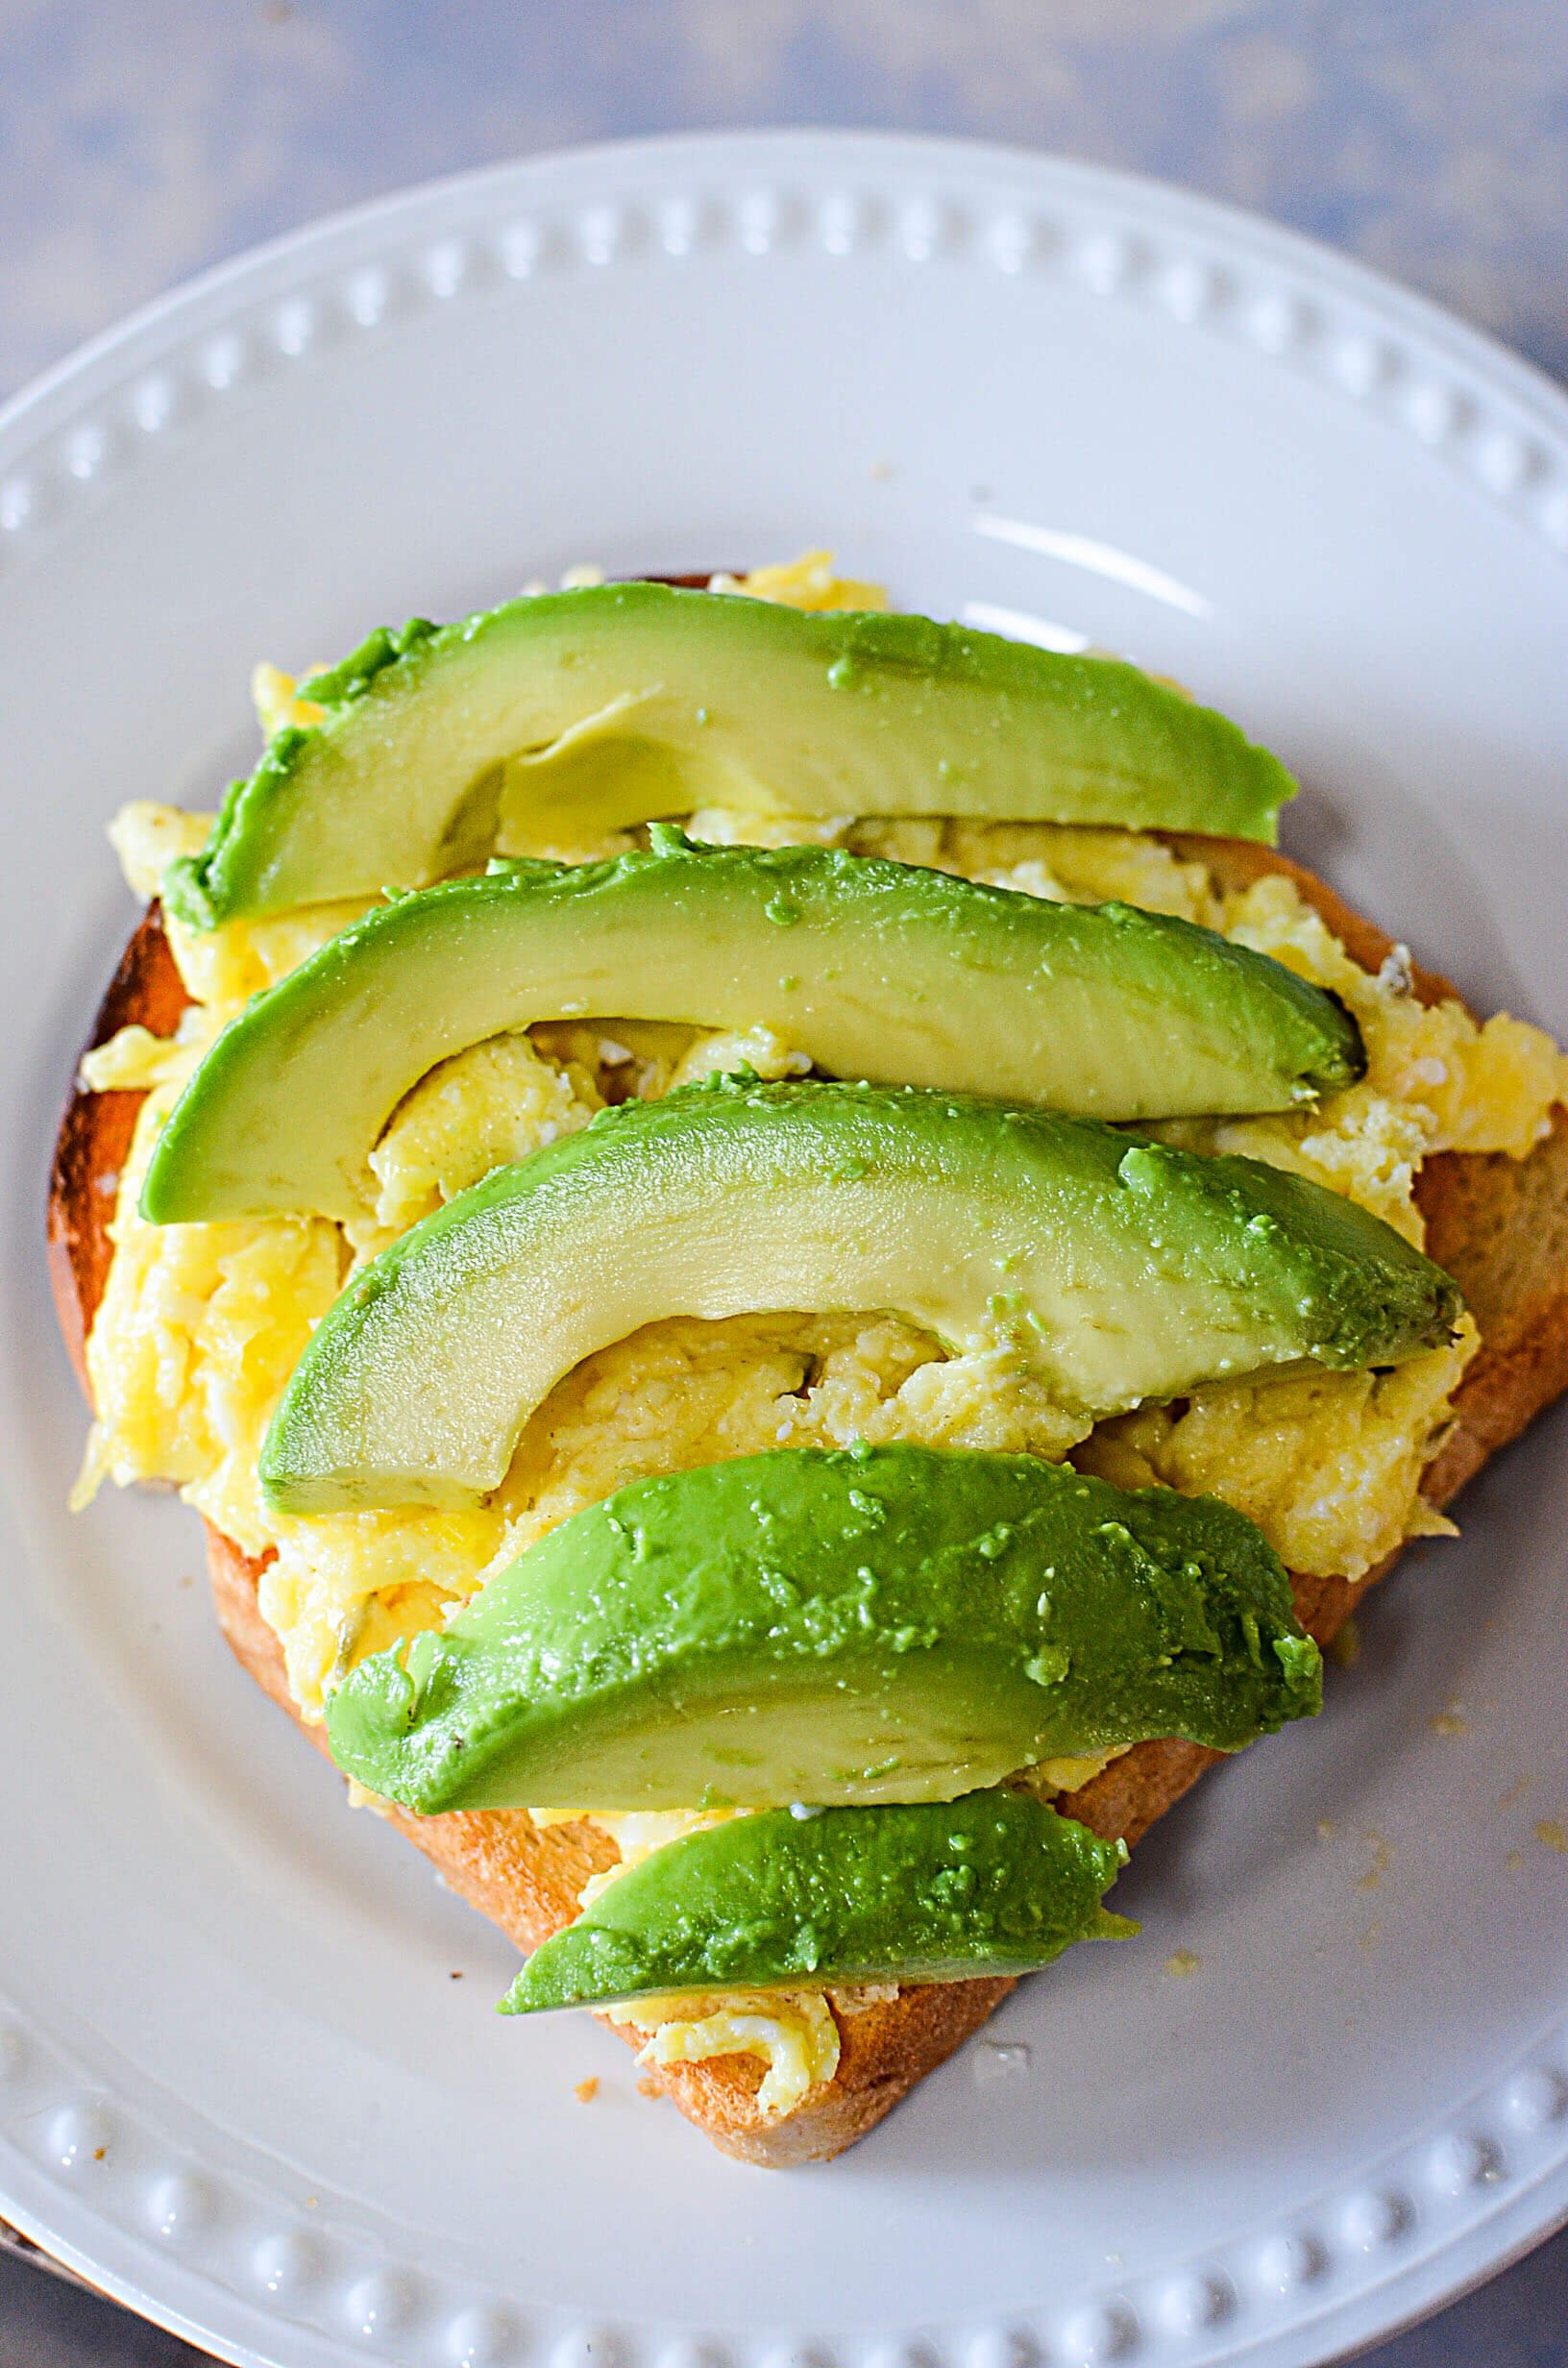 Avocado that's been sliced is sitting on top of scrambled eggs and toast on a white plate.